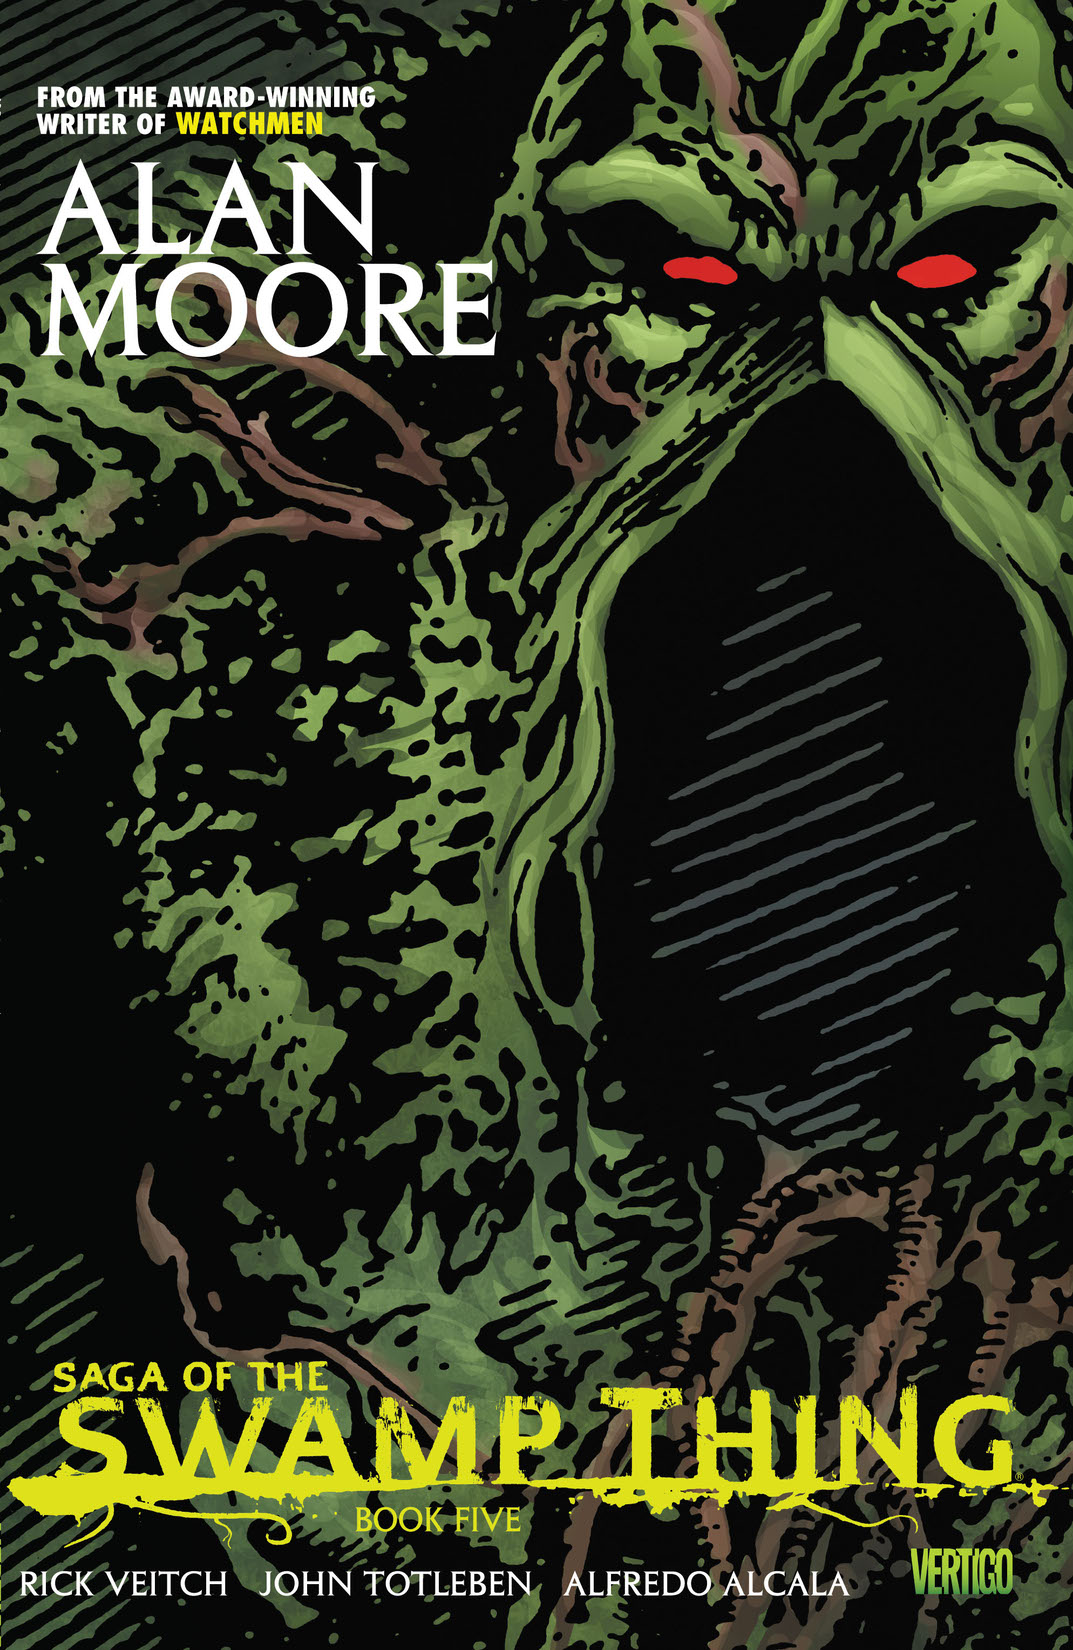 Saga of the Swamp Thing Book Five preview images